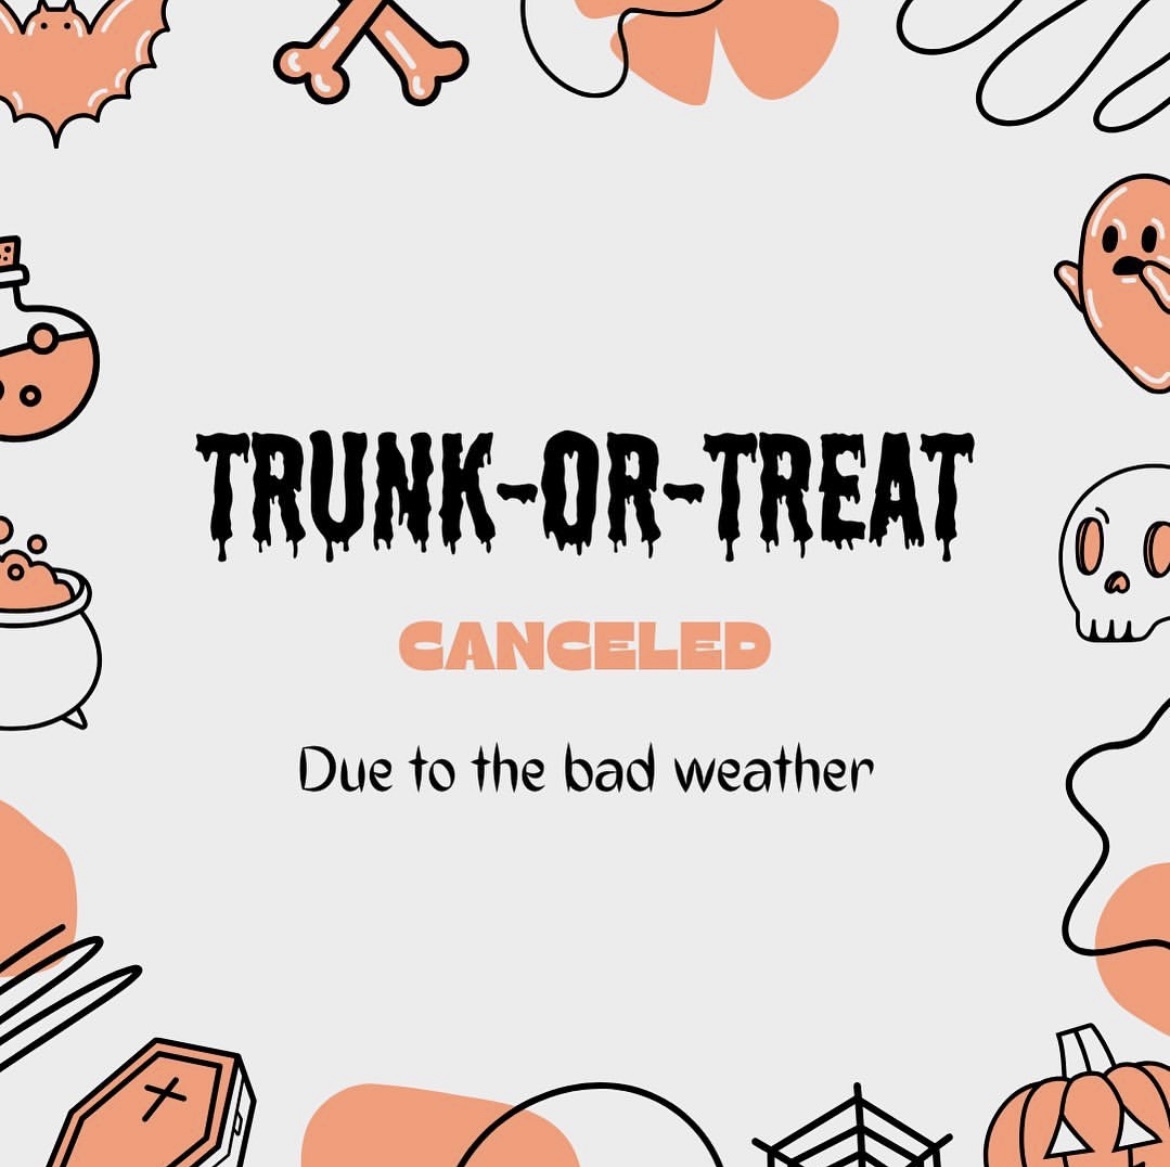 HOSA posted this image announcing Trunk-or-Treat being canceled Oct. 26.